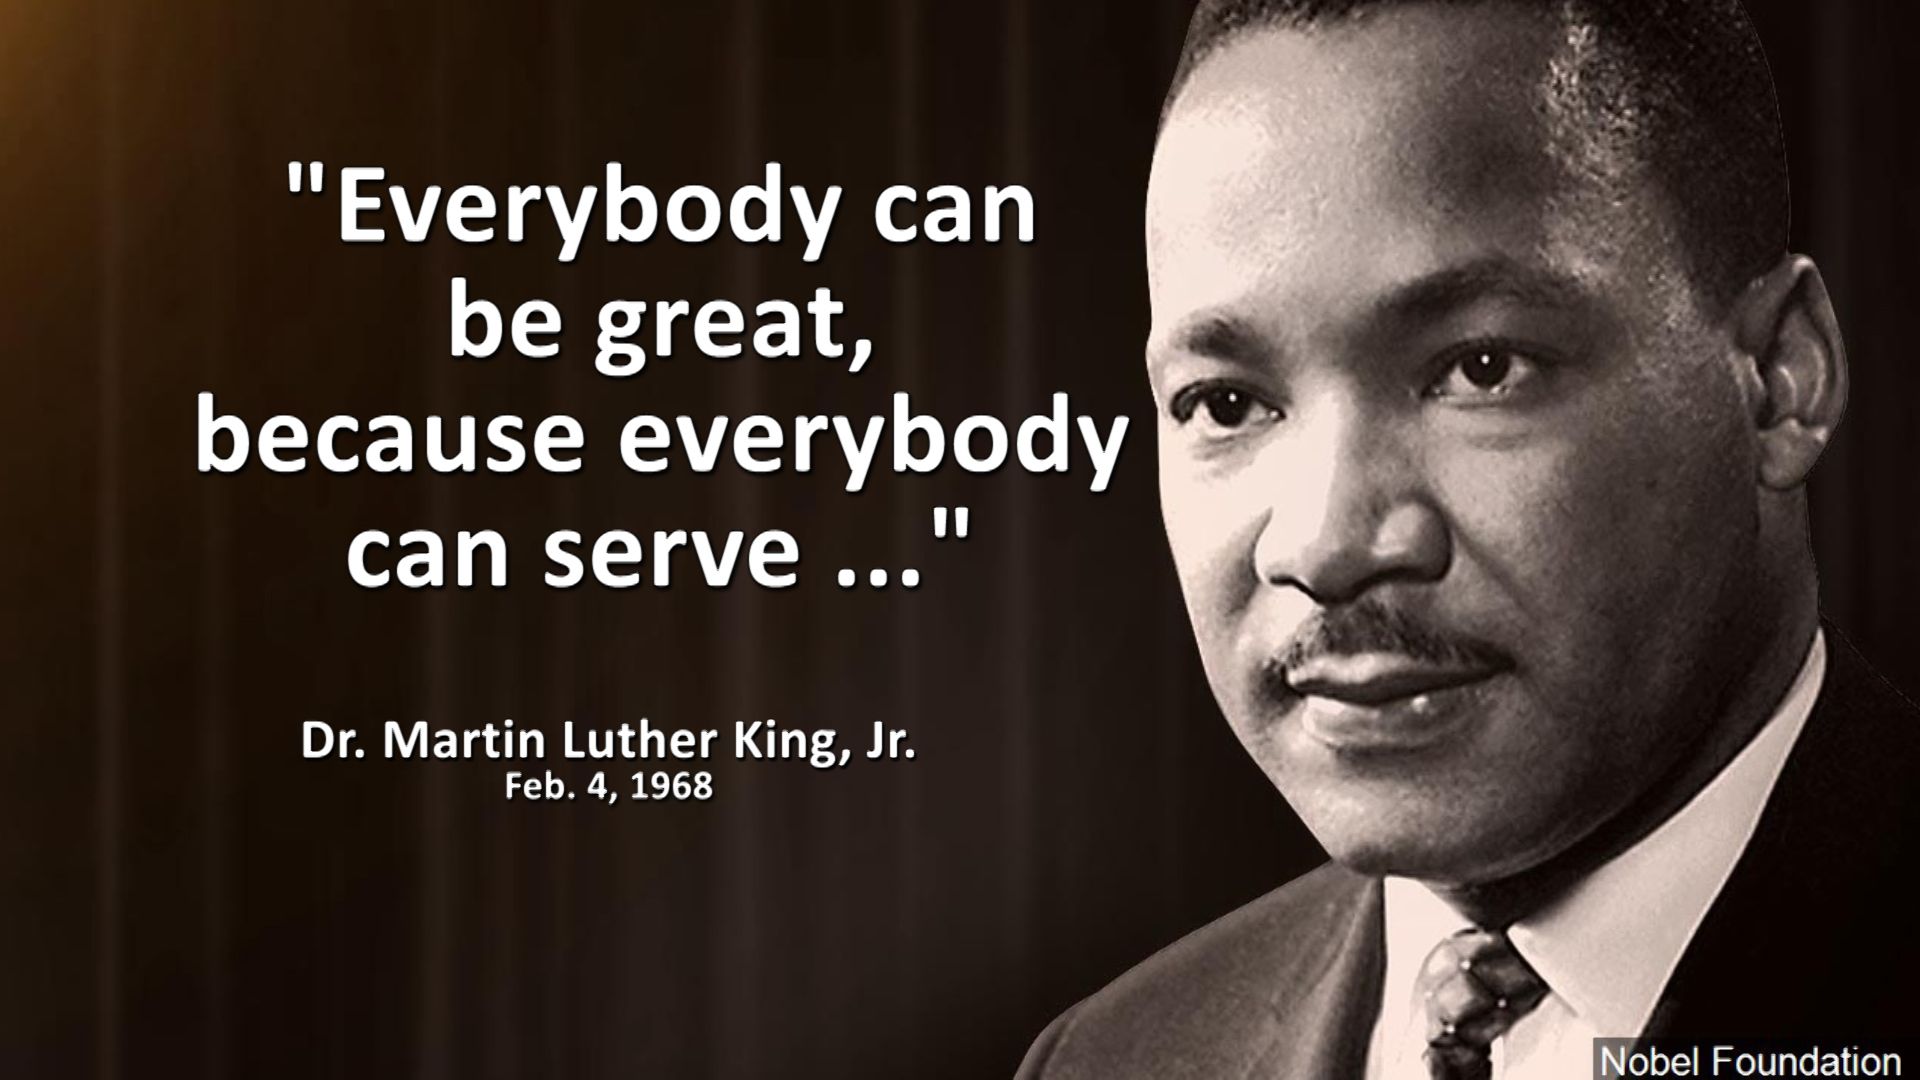 25th anniversary of Martin Luther King, Jr. Day of Service